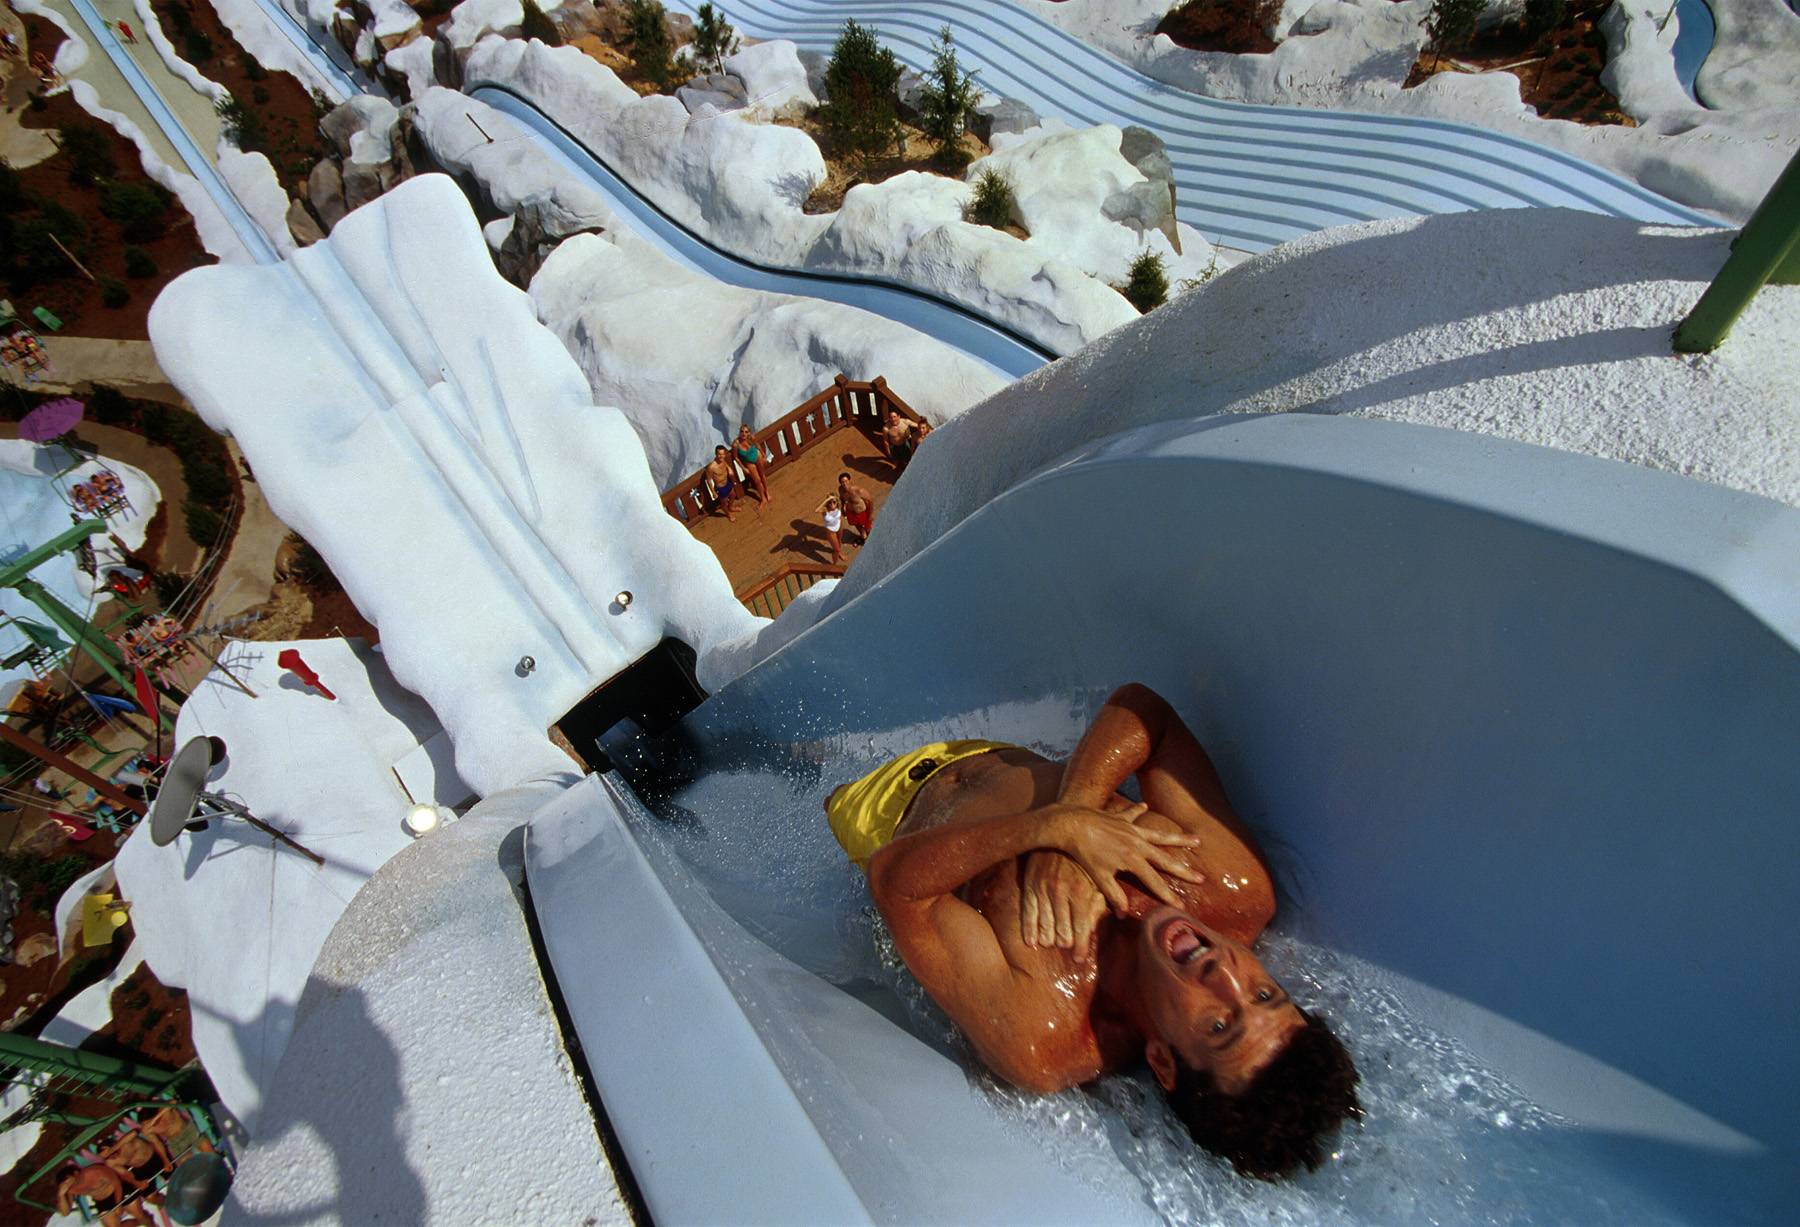 Blizzard Beach had its last day of operation on March 16 before closing for refurbishment